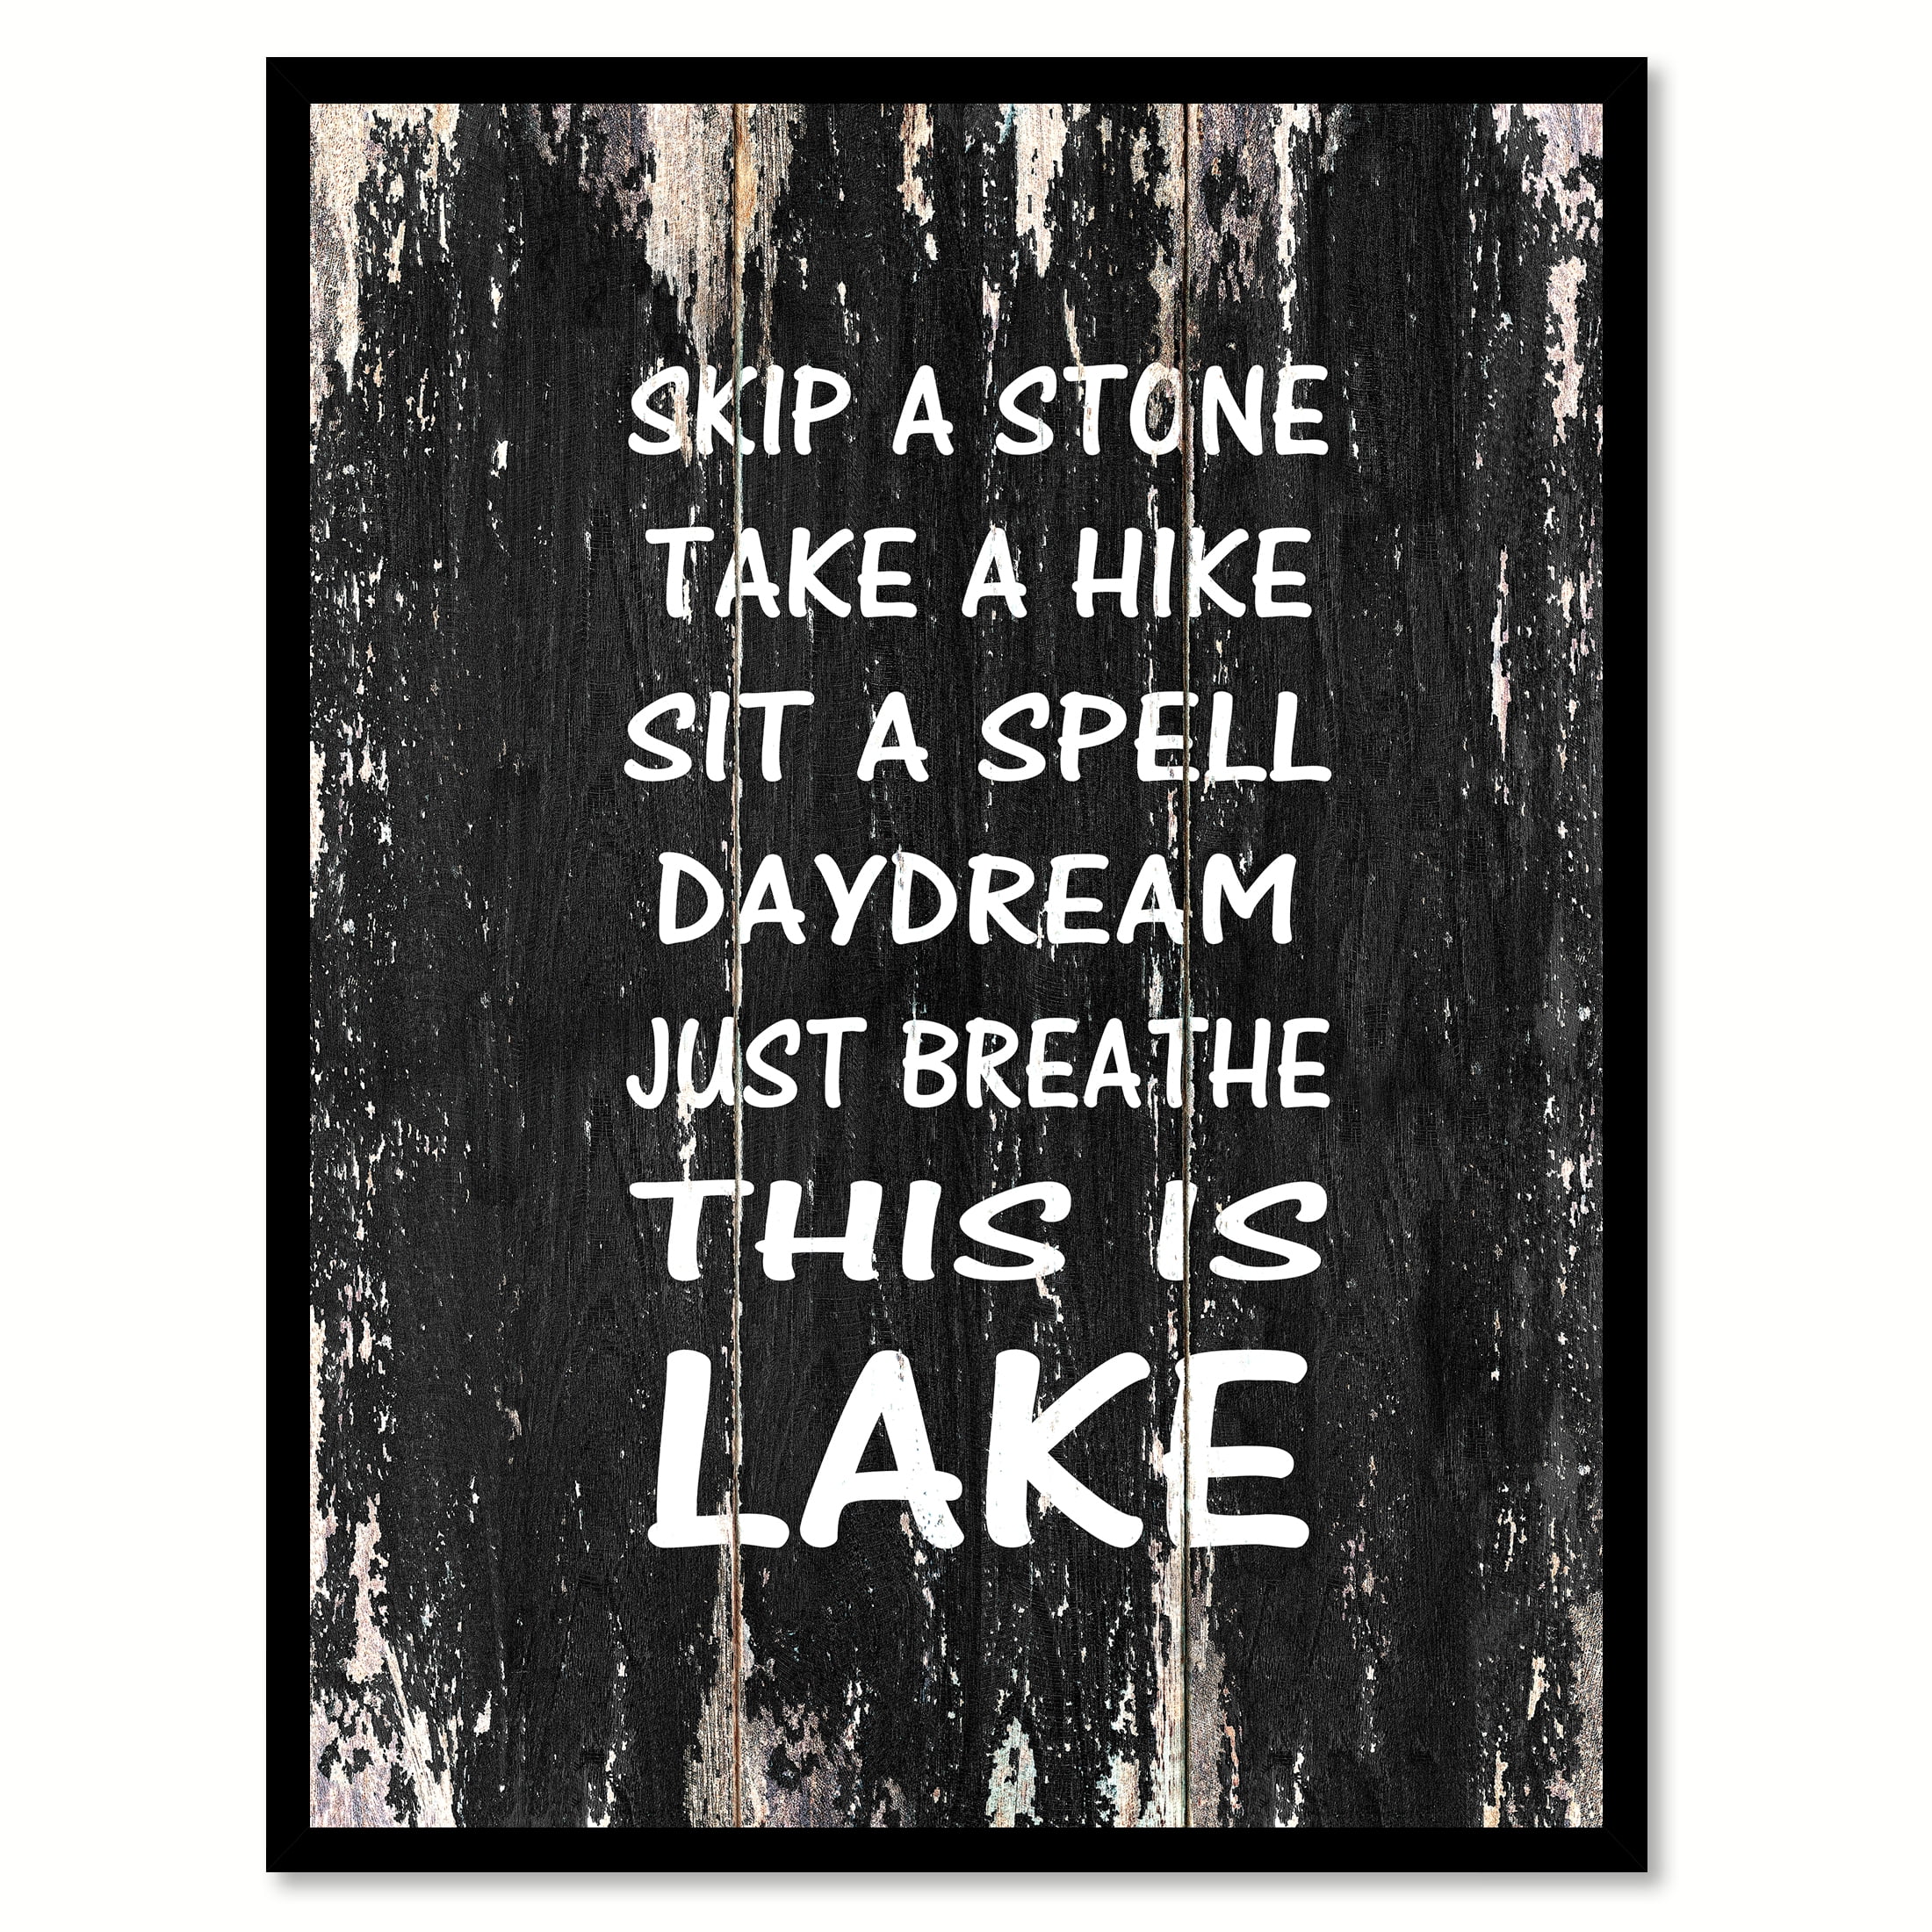 Details about   Daydream Inspirational Wall Art Print Motivational Quote Poster Decor Gift him 